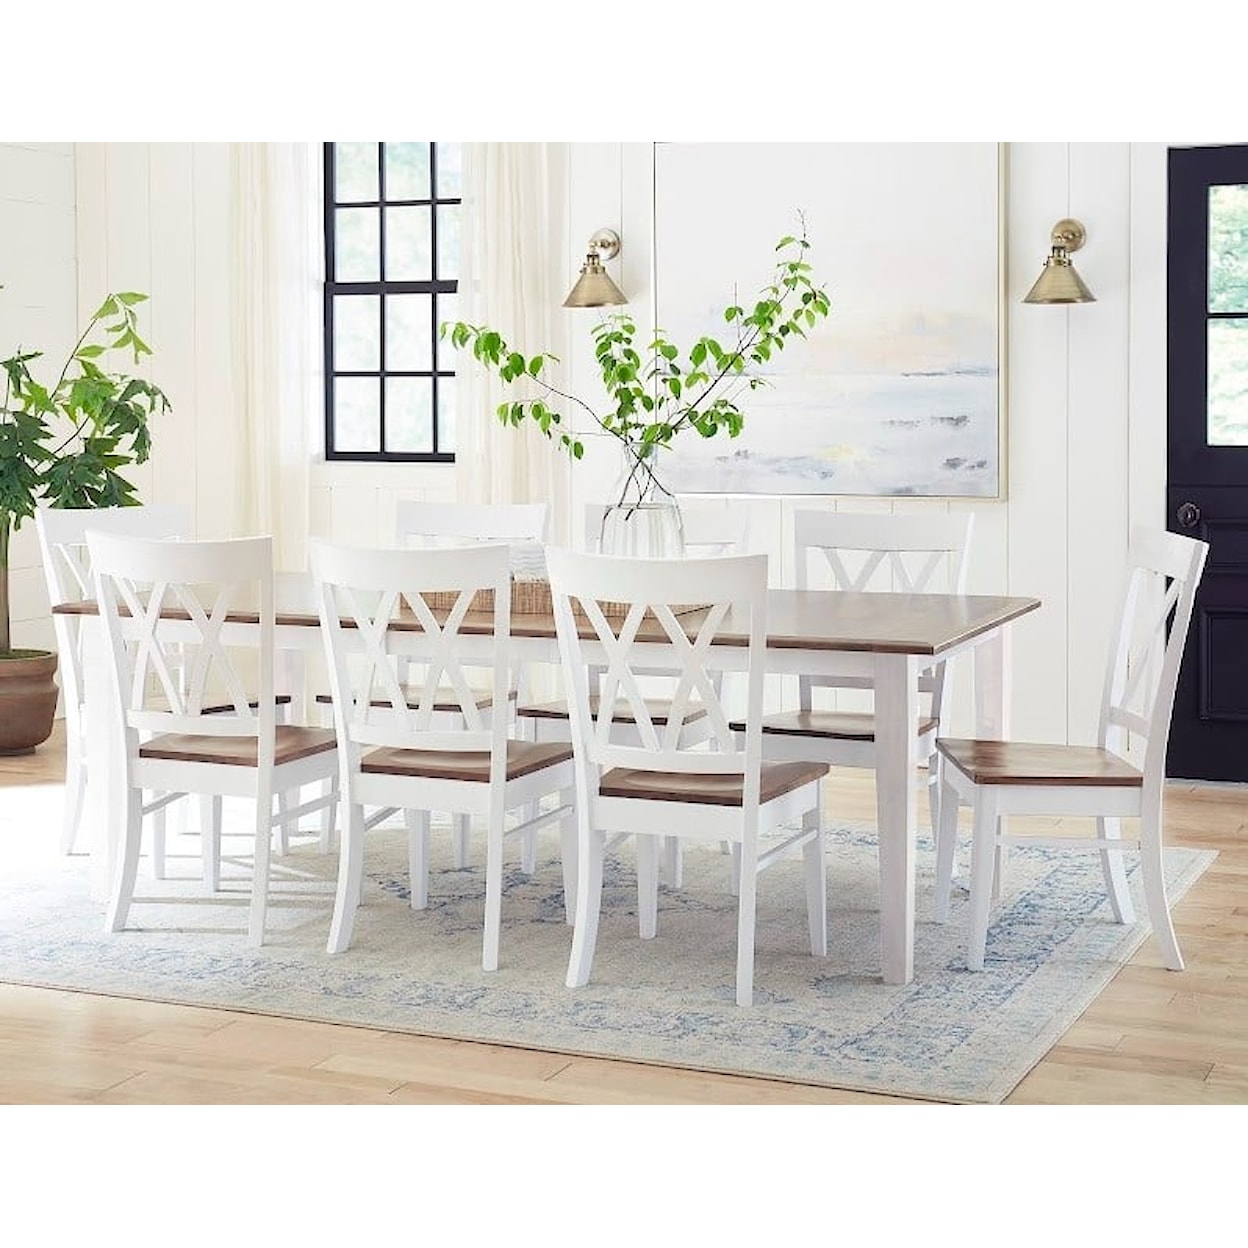 Archbold Furniture Amish Essentials Casual Dining 9-Piece Dining Set